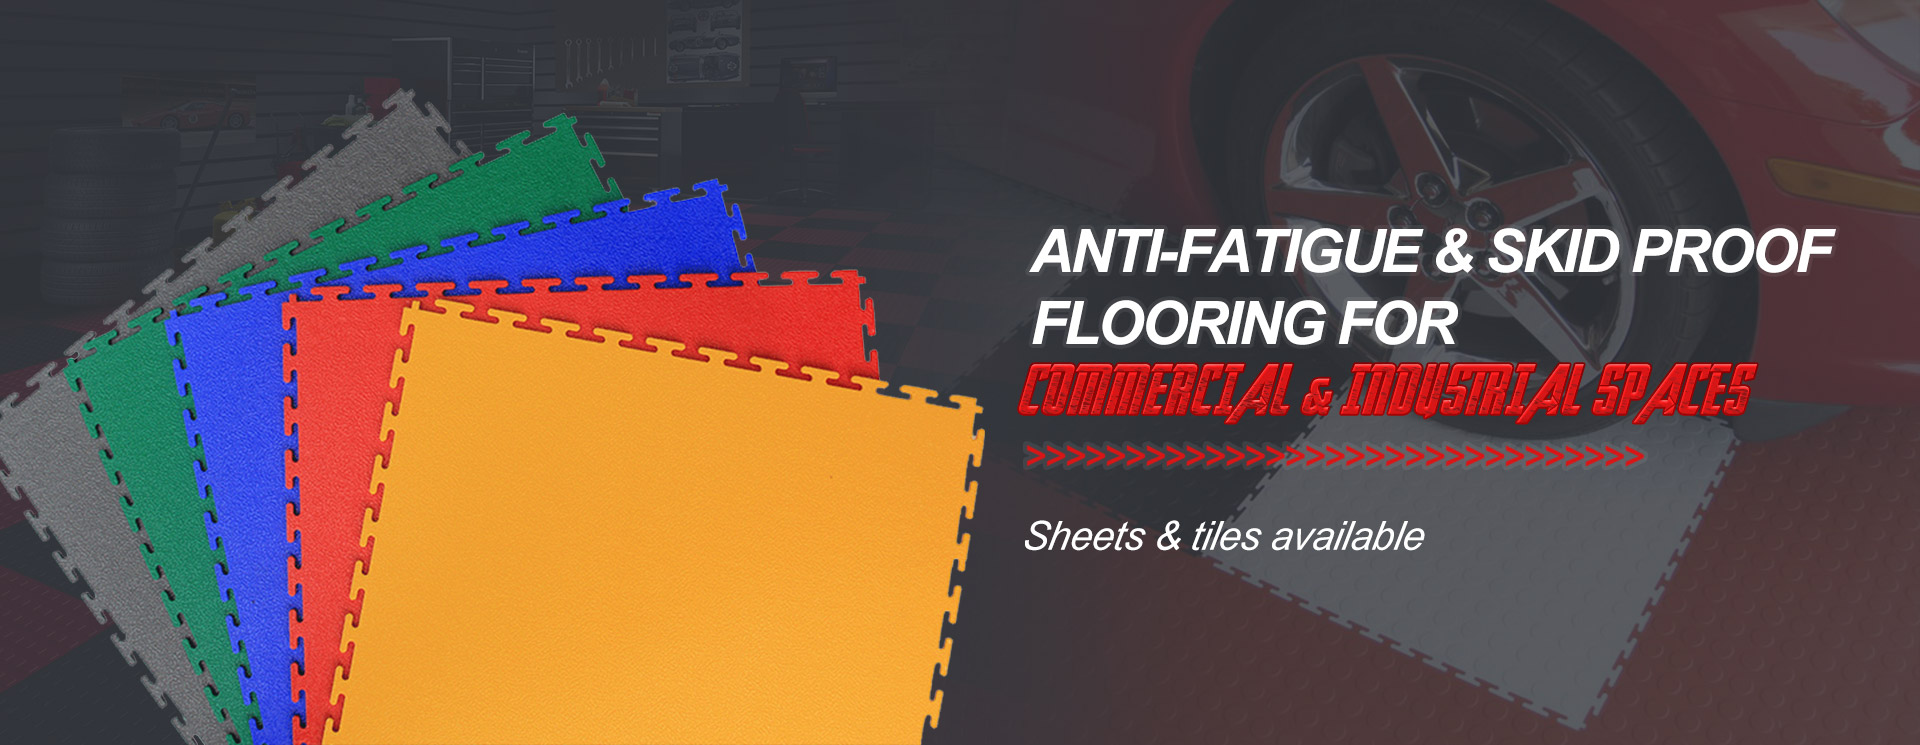 Anti-fatigue & skid proof  flooring for commercial & industrial spaces